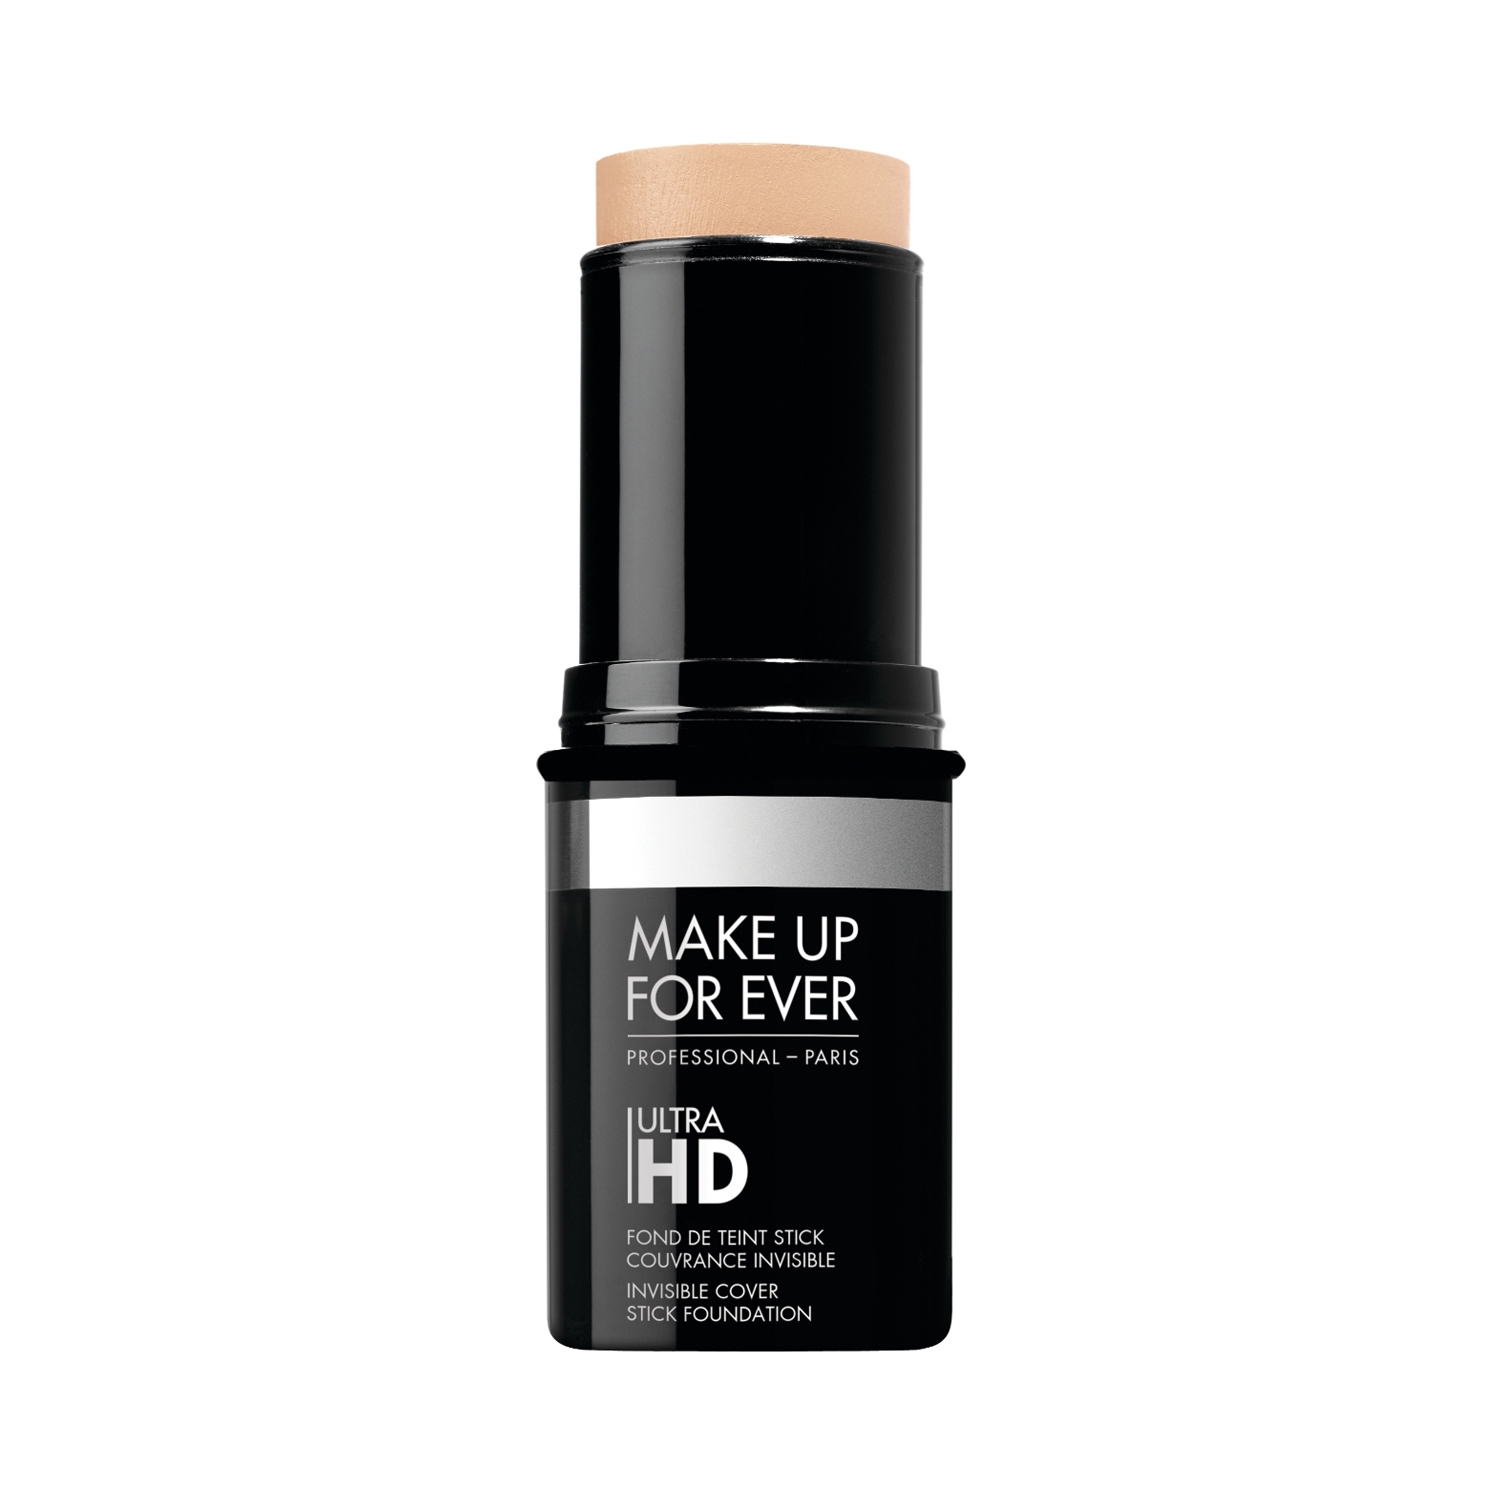 Make Up For Ever | Make Up For Ever Ultra HD Foundation Stick - Y225 Marble (12.5g)